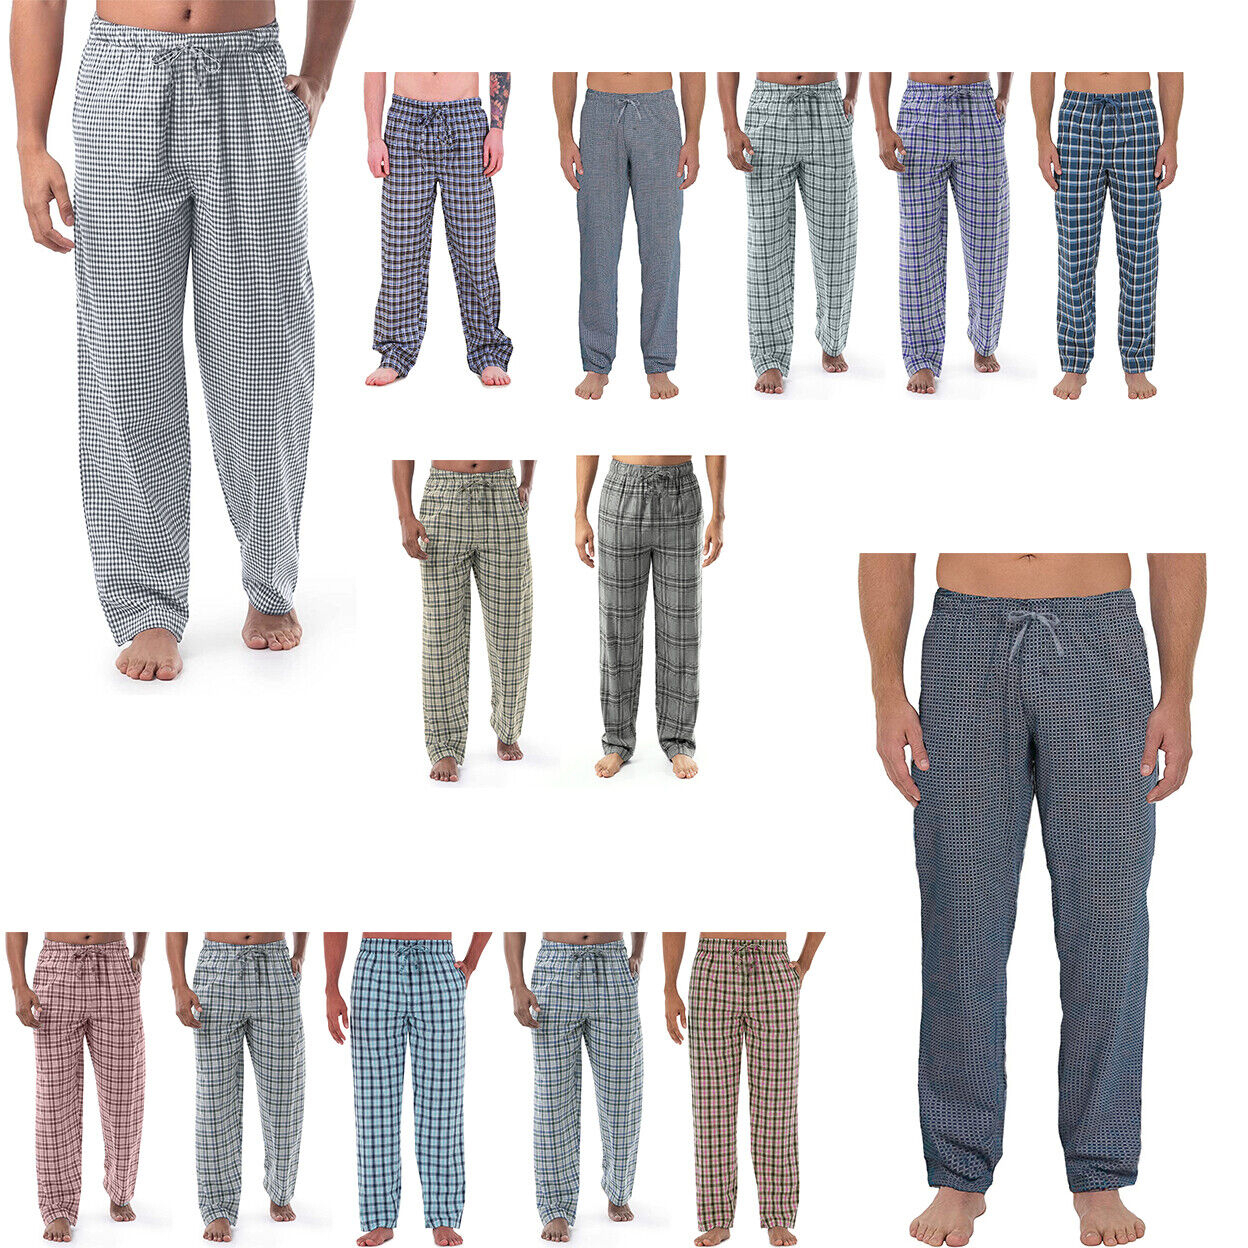 Multi-Pack: Men's Ultra-Soft Solid & Plaid Cotton Jersey Knit Comfy Sleep Lounge Pajama Pants - 1-pack Plaid, Small